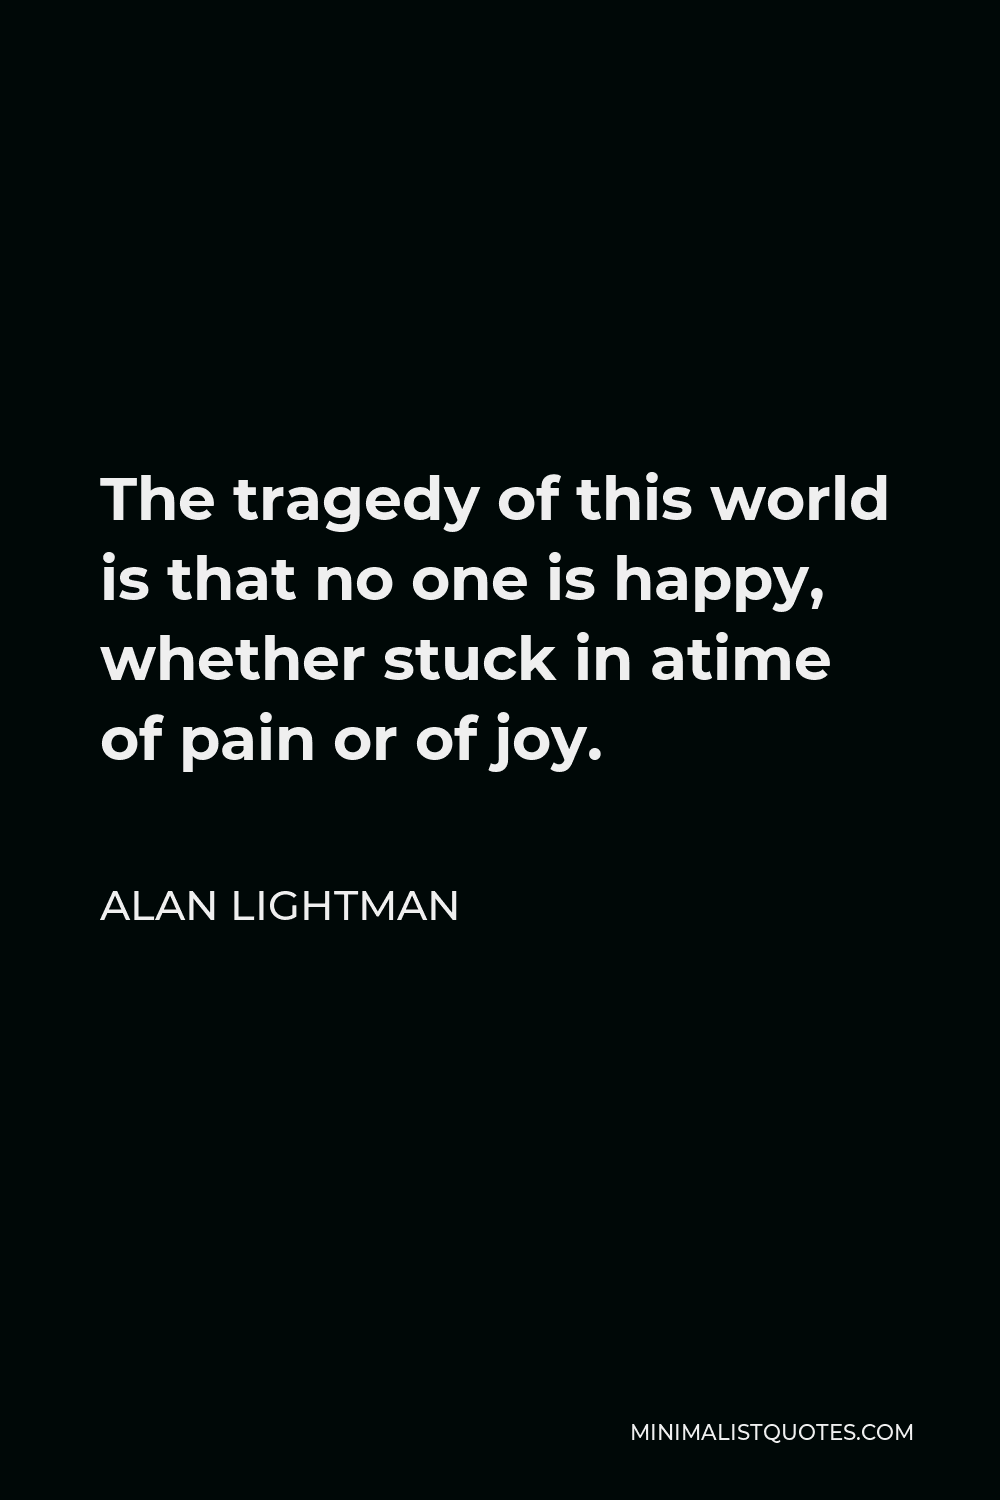 Alan Lightman Quote - The tragedy of this world is that no one is happy, whether stuck in atime of pain or of joy.